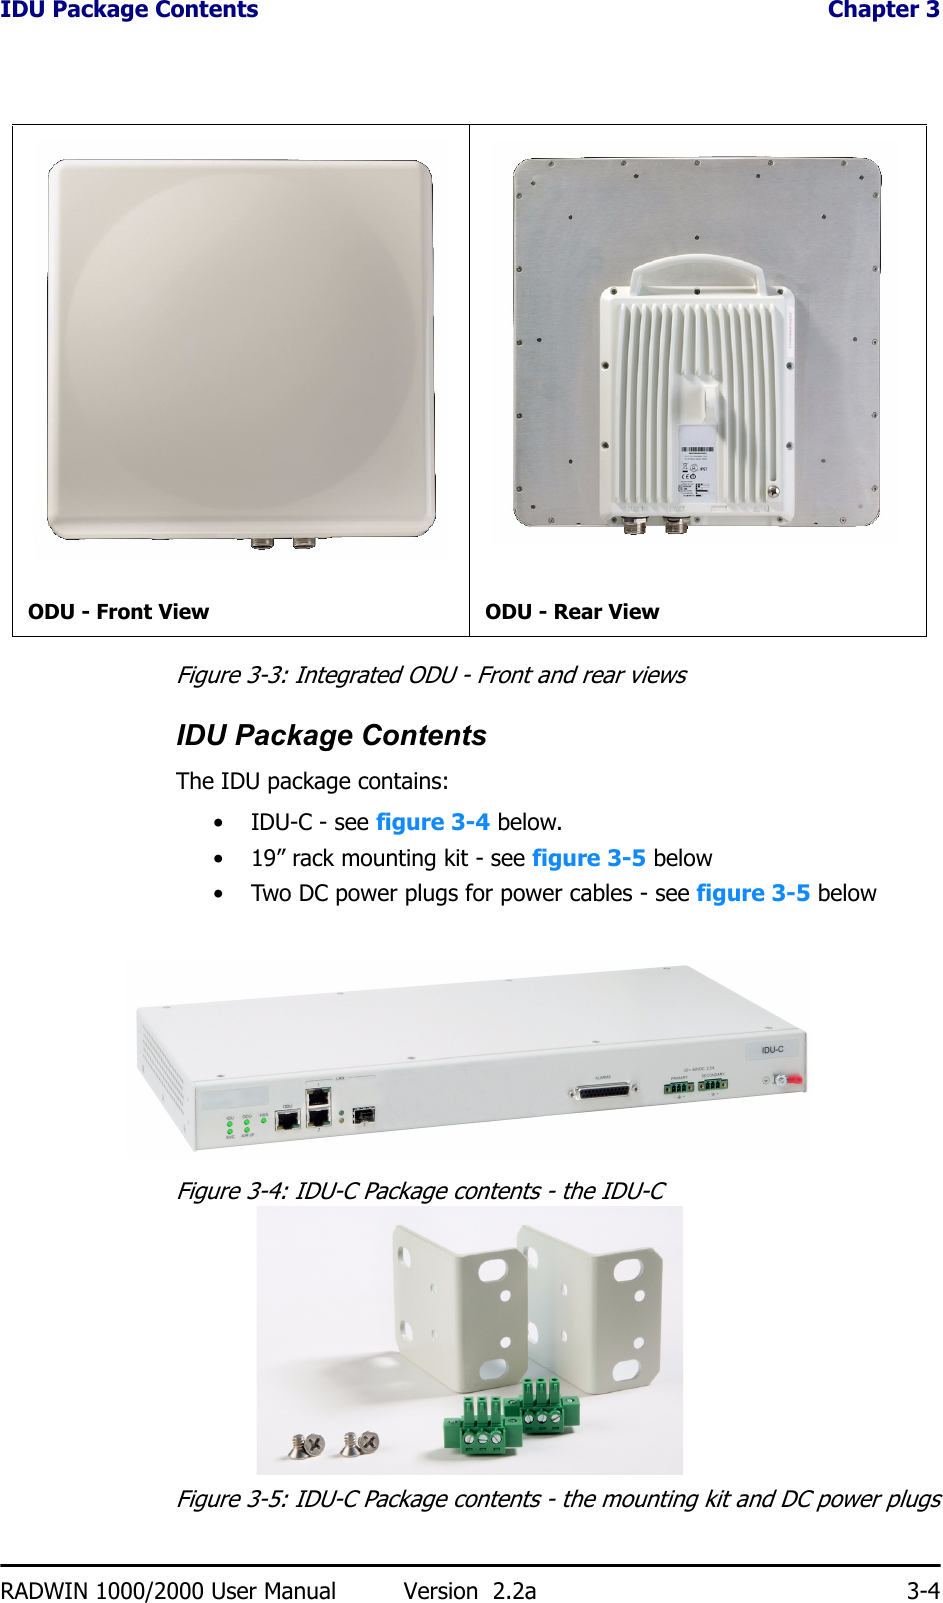 IDU Package Contents  Chapter 3RADWIN 1000/2000 User Manual Version  2.2a 3-4Figure 3-3: Integrated ODU - Front and rear viewsIDU Package ContentsThe IDU package contains:• IDU-C - see figure 3-4 below.• 19” rack mounting kit - see figure 3-5 below• Two DC power plugs for power cables - see figure 3-5 belowFigure 3-4: IDU-C Package contents - the IDU-CFigure 3-5: IDU-C Package contents - the mounting kit and DC power plugsODU - Front View ODU - Rear View